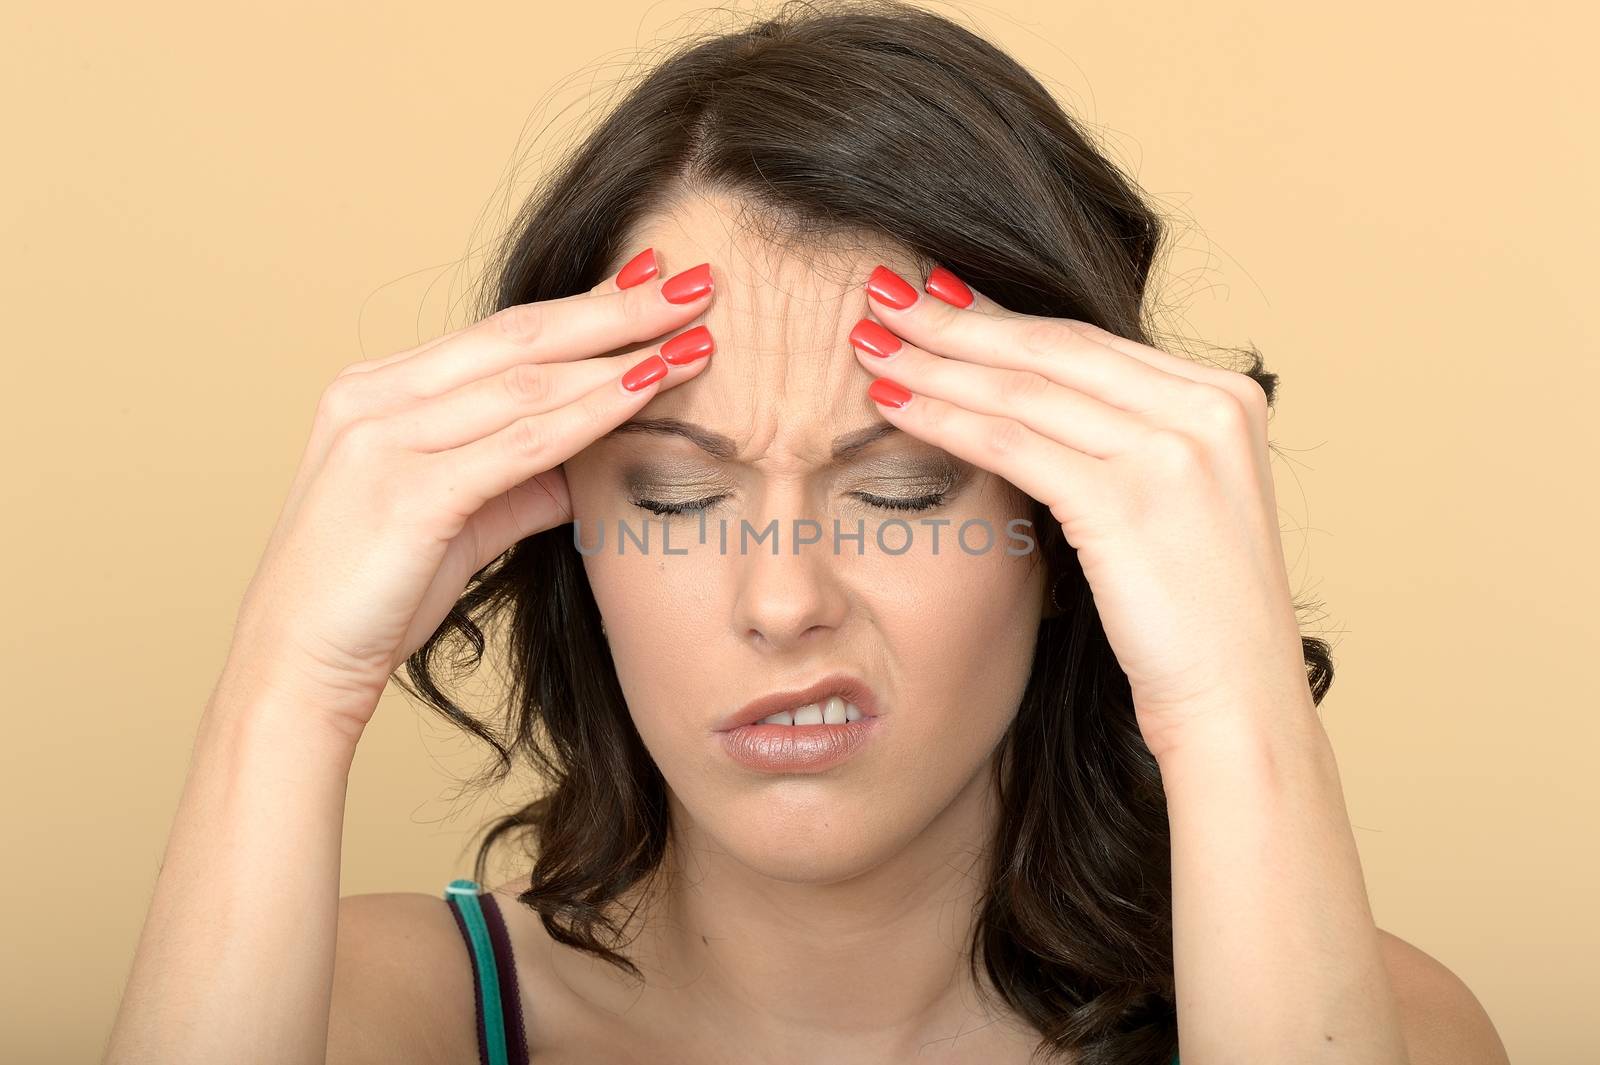 Attractive Young Woman With a Painful Headache by Whiteboxmedia